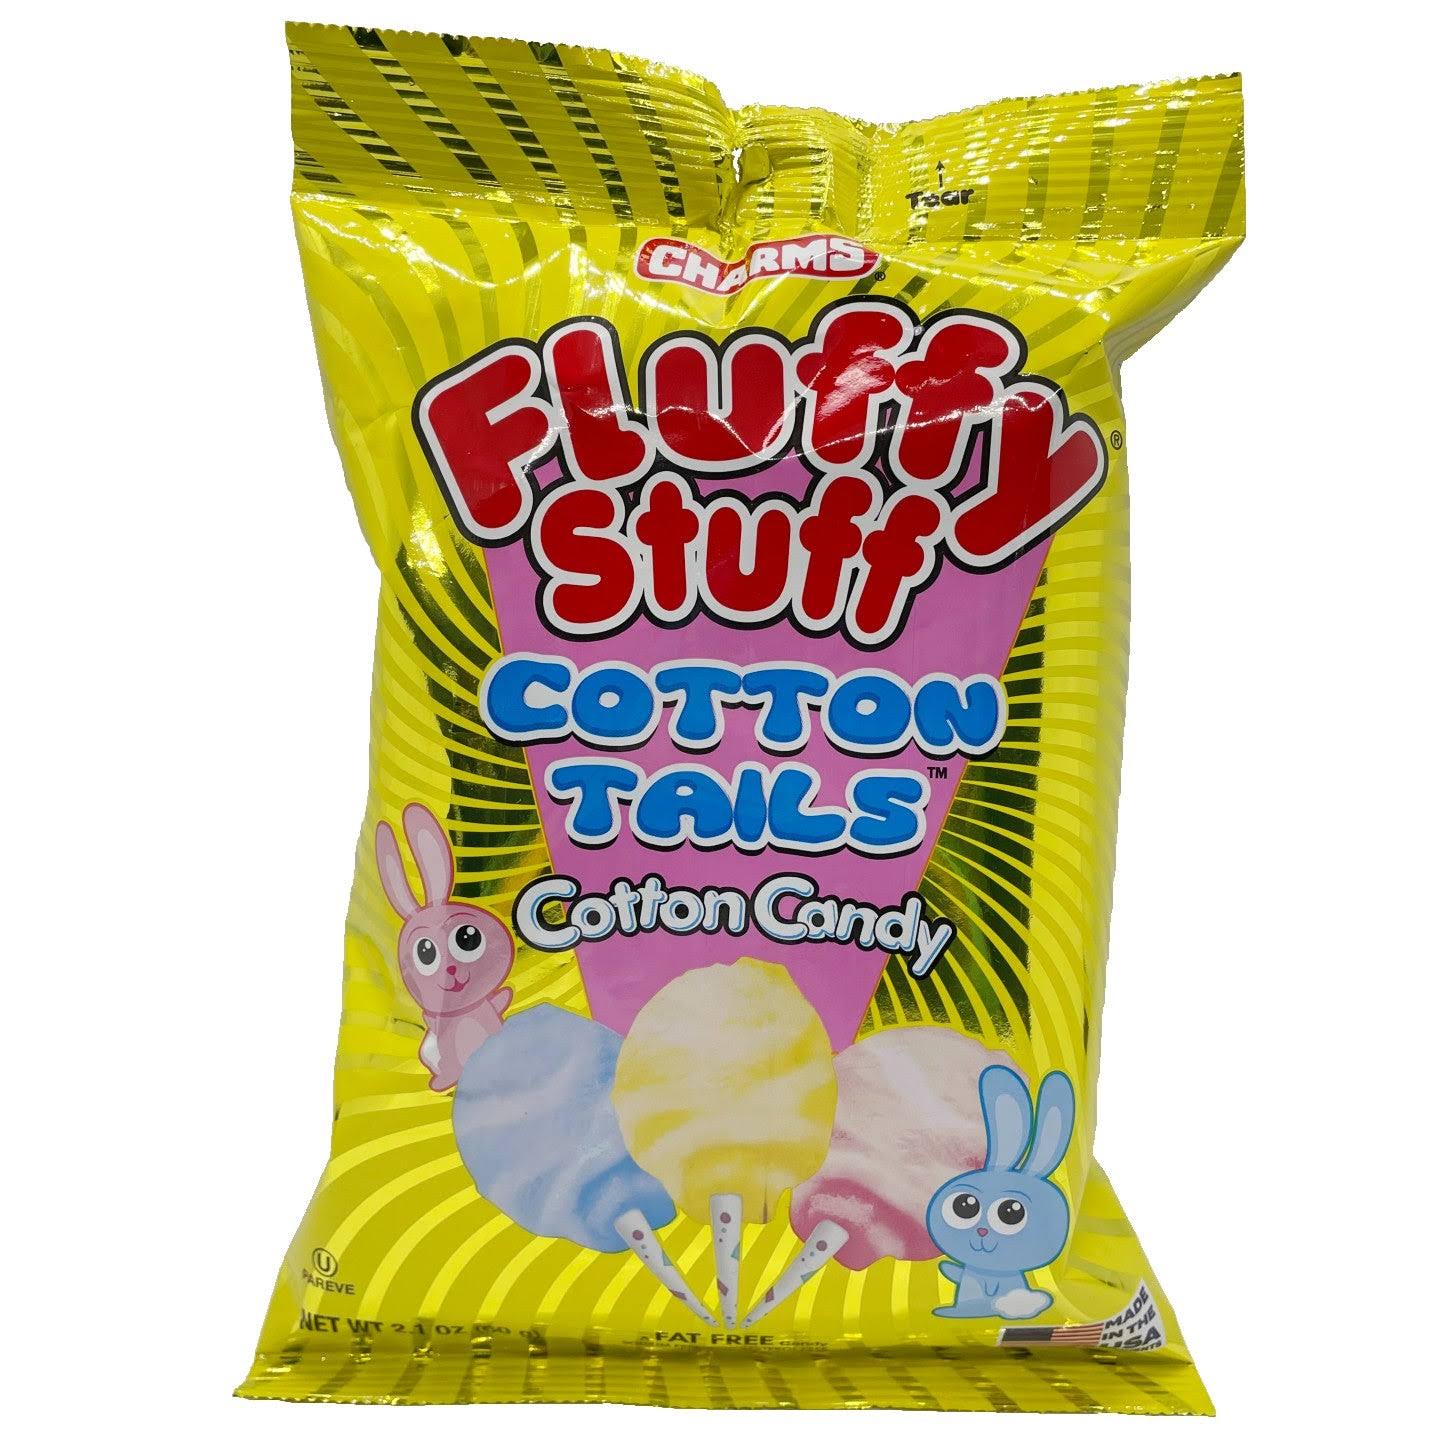 Charms Fluffy Stuff Spider Web Sour Apple Cotton Candy